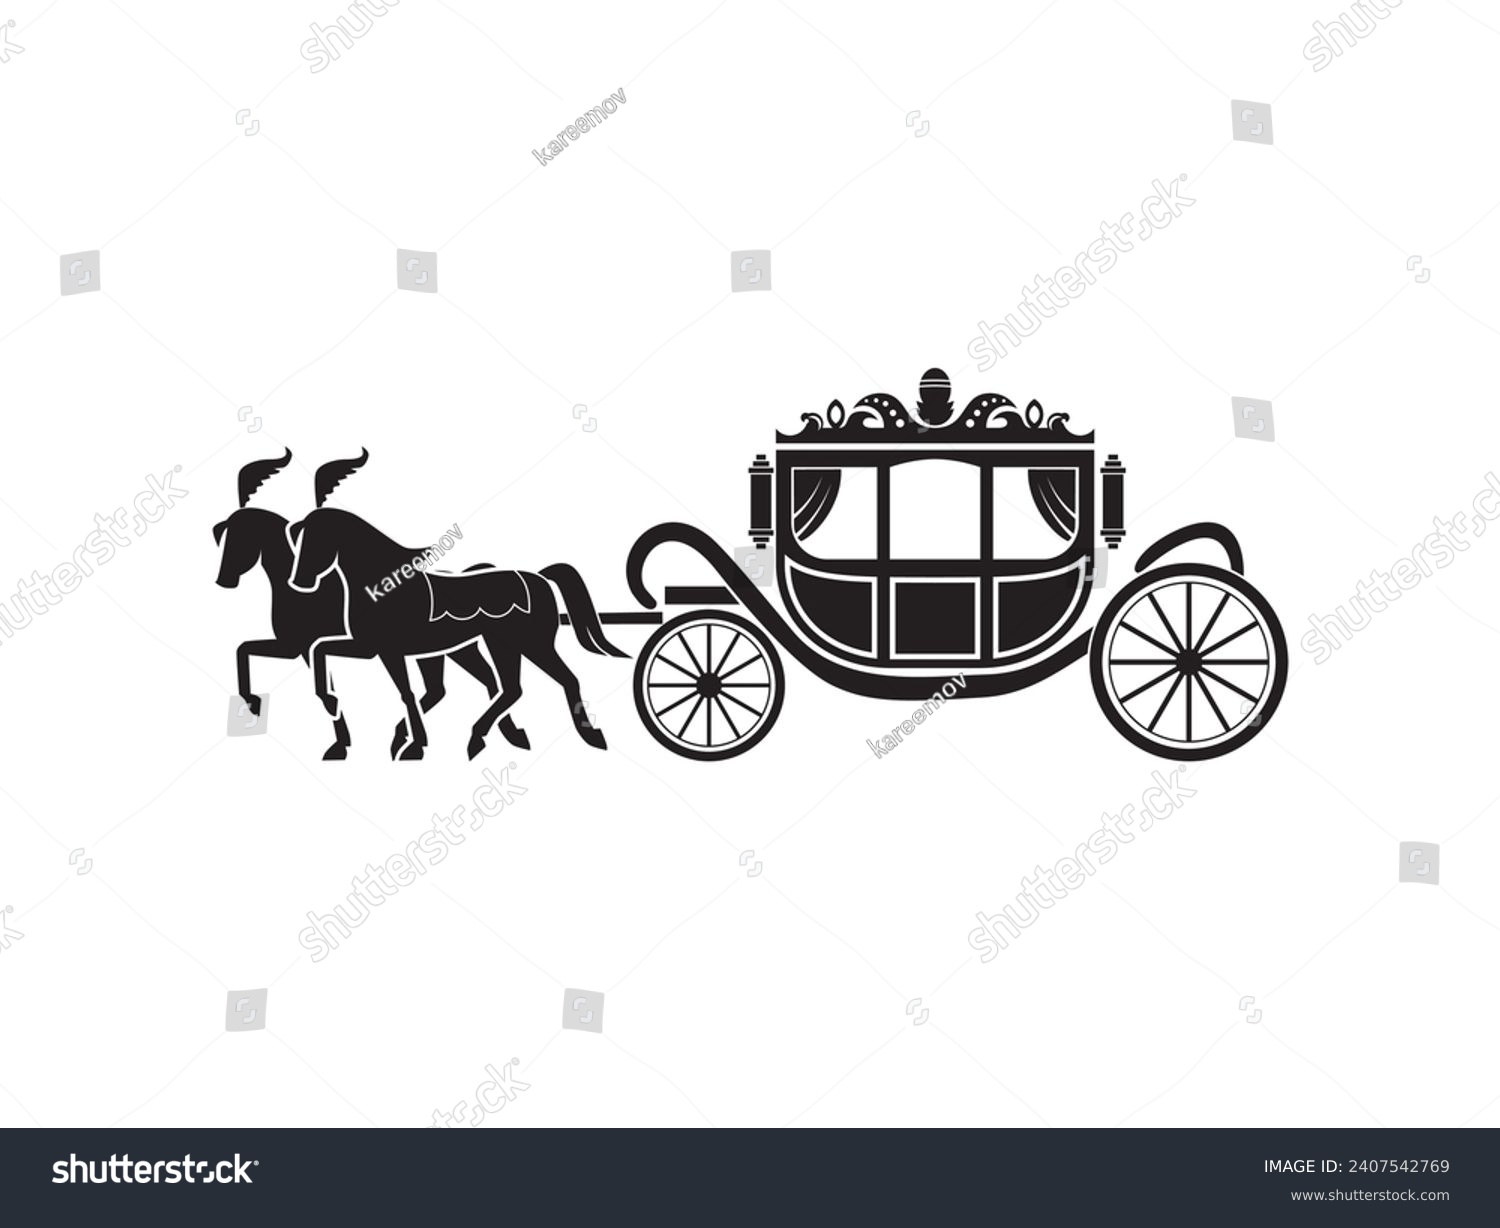 SVG of horse-drawn carriage icon vector, useful for brand and logo designs	 svg